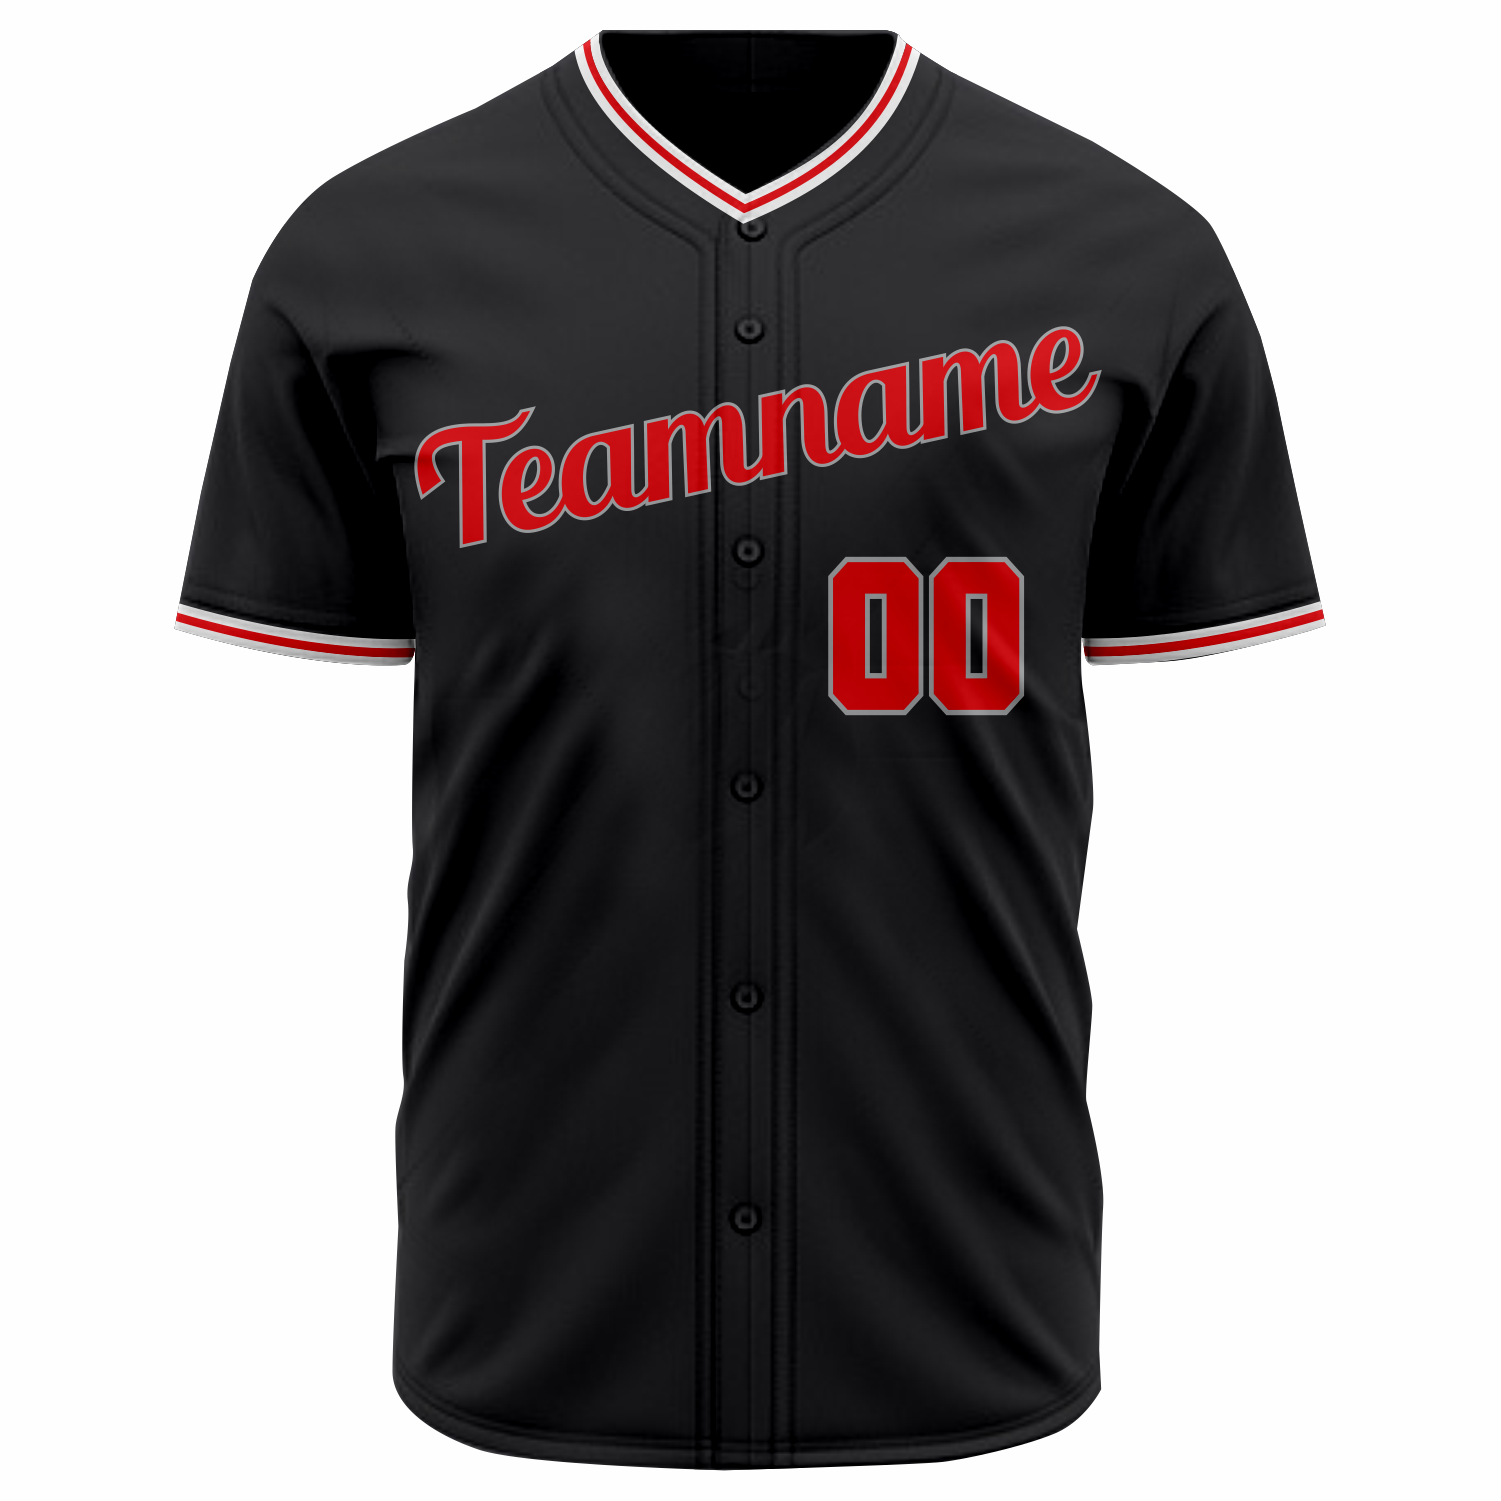 black red and white baseball jersey